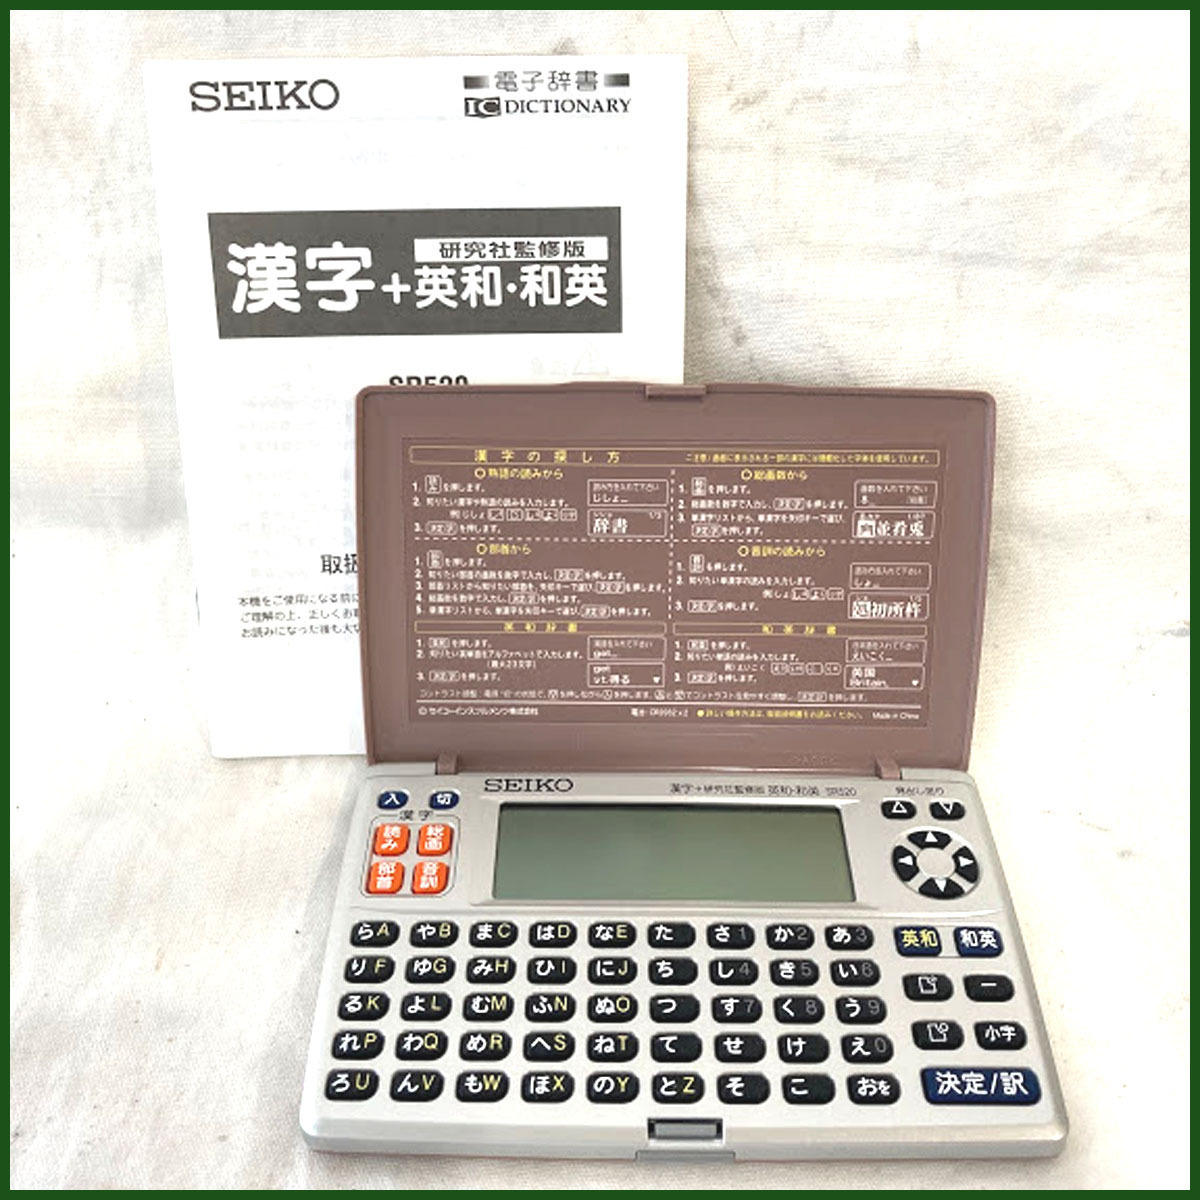  battery less therefore operation not yet verification *SEIKO* computerized dictionary Chinese character britain peace peace britain SR520 used 